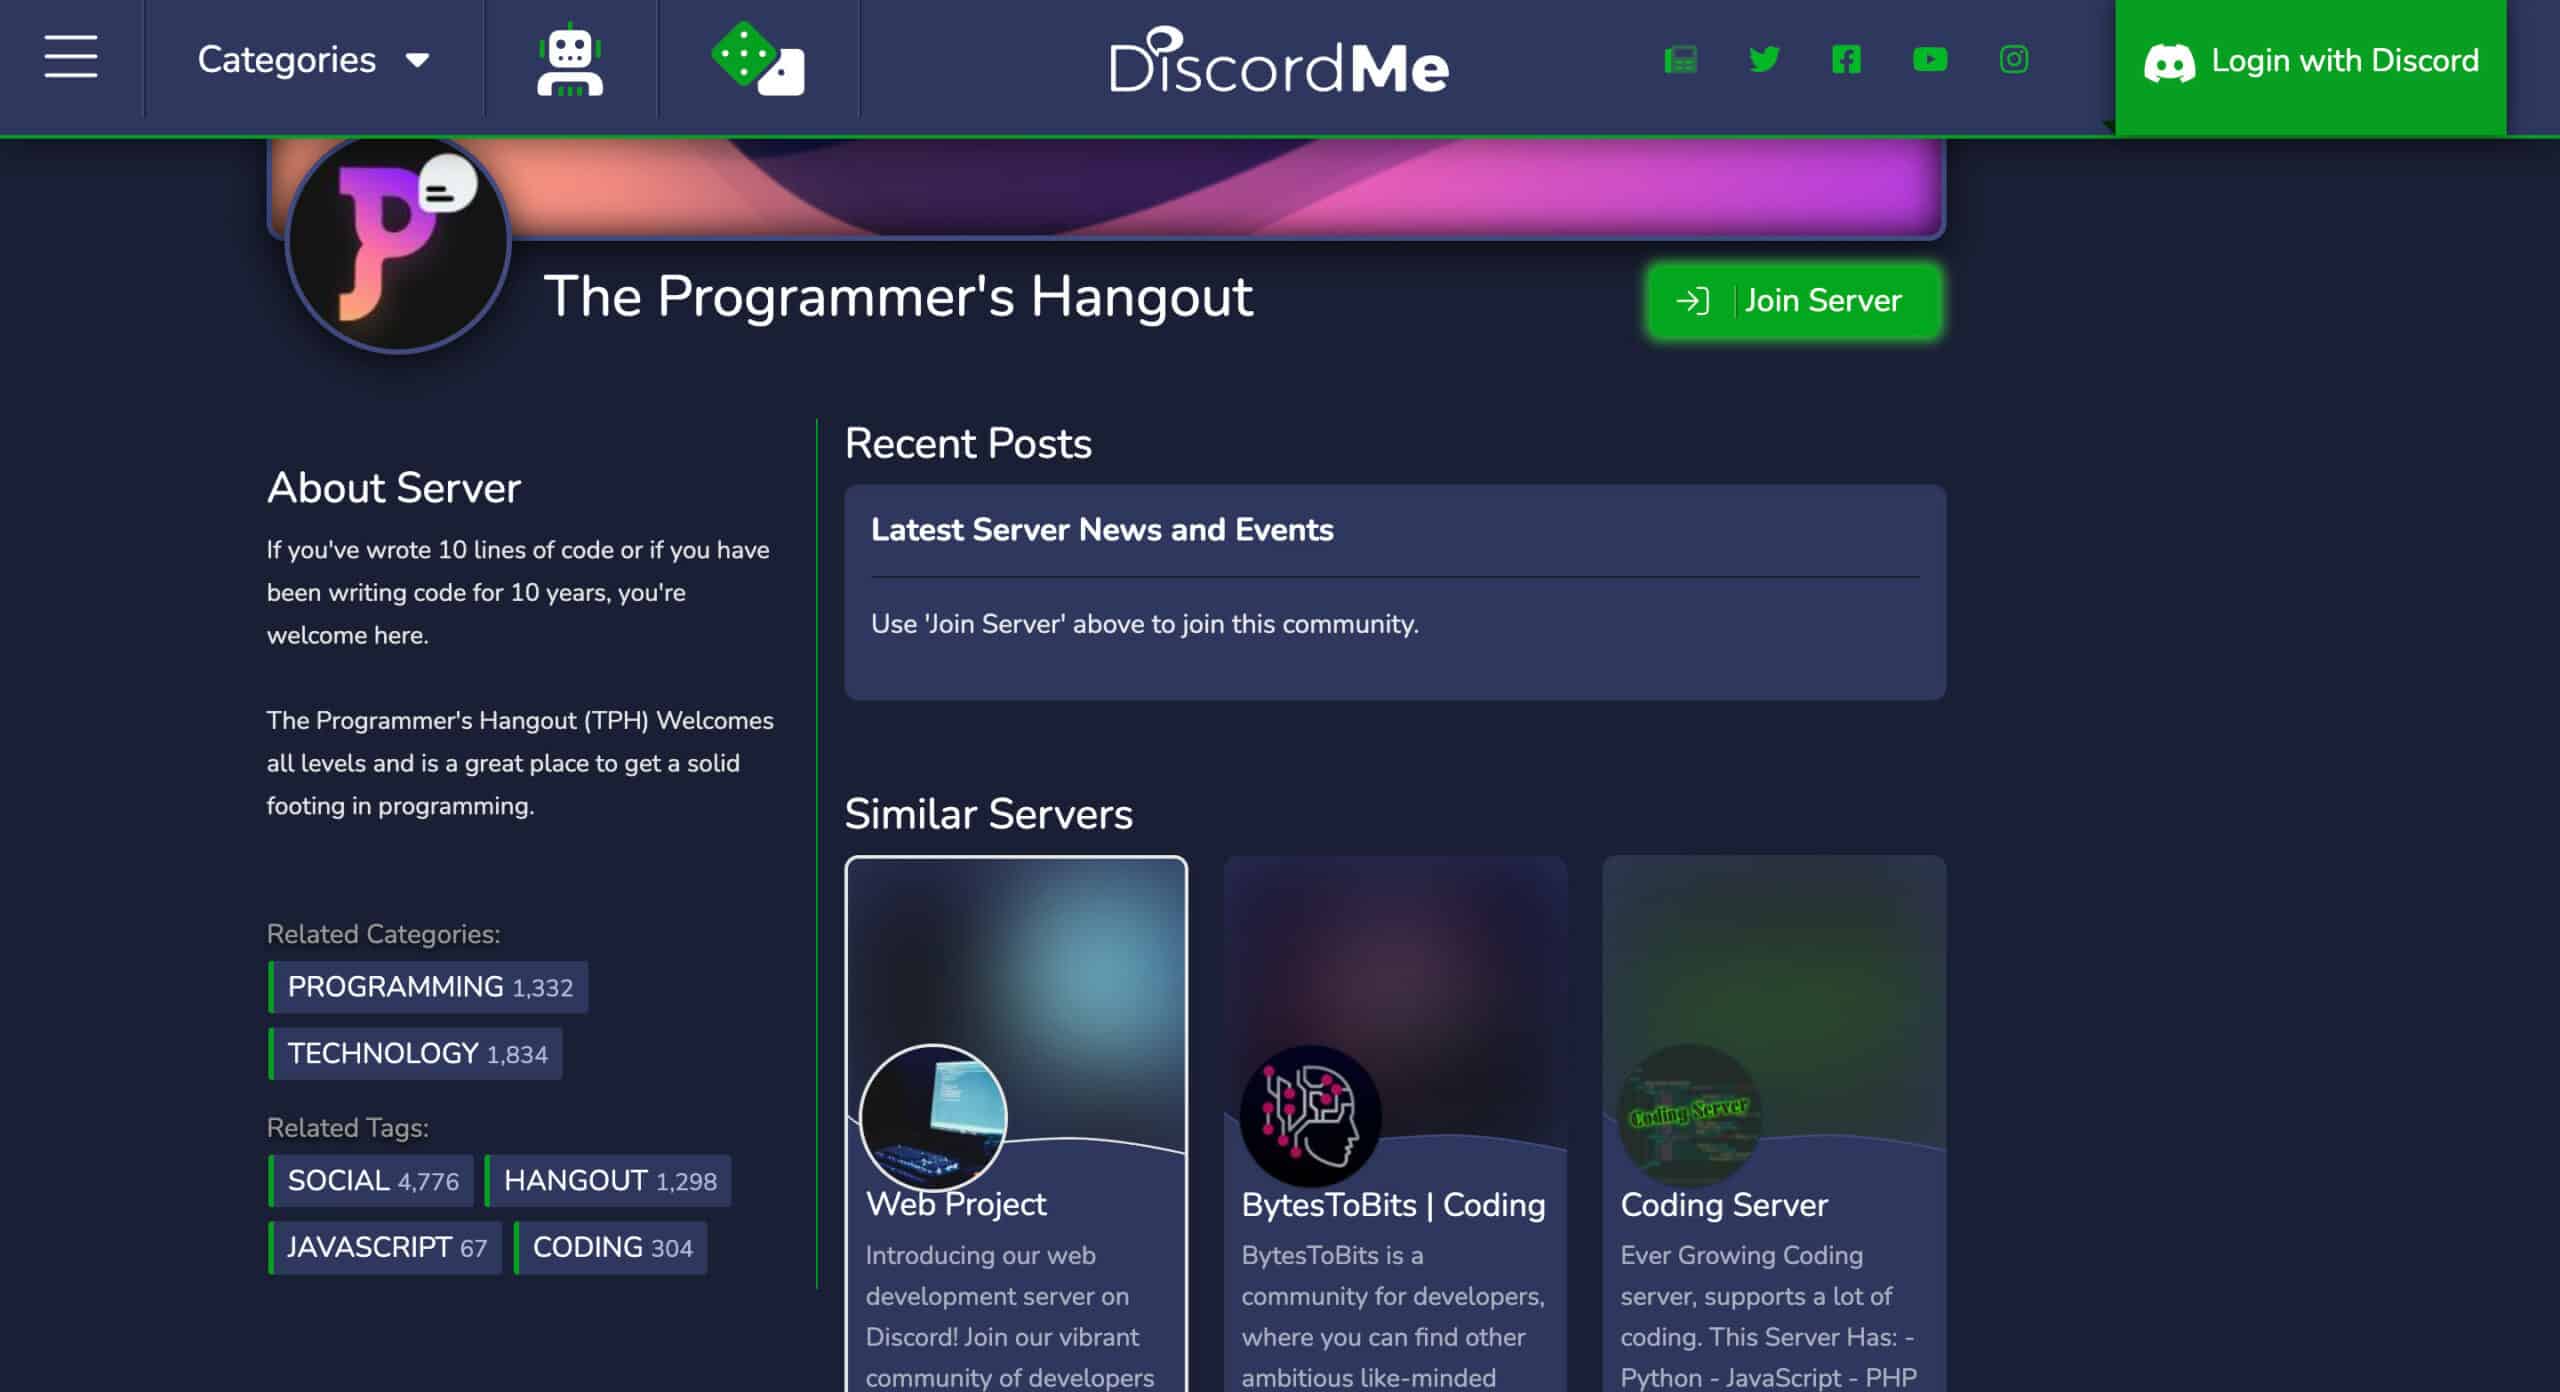 Discord channels could be a great place to find suitable candidates for your development roles. 